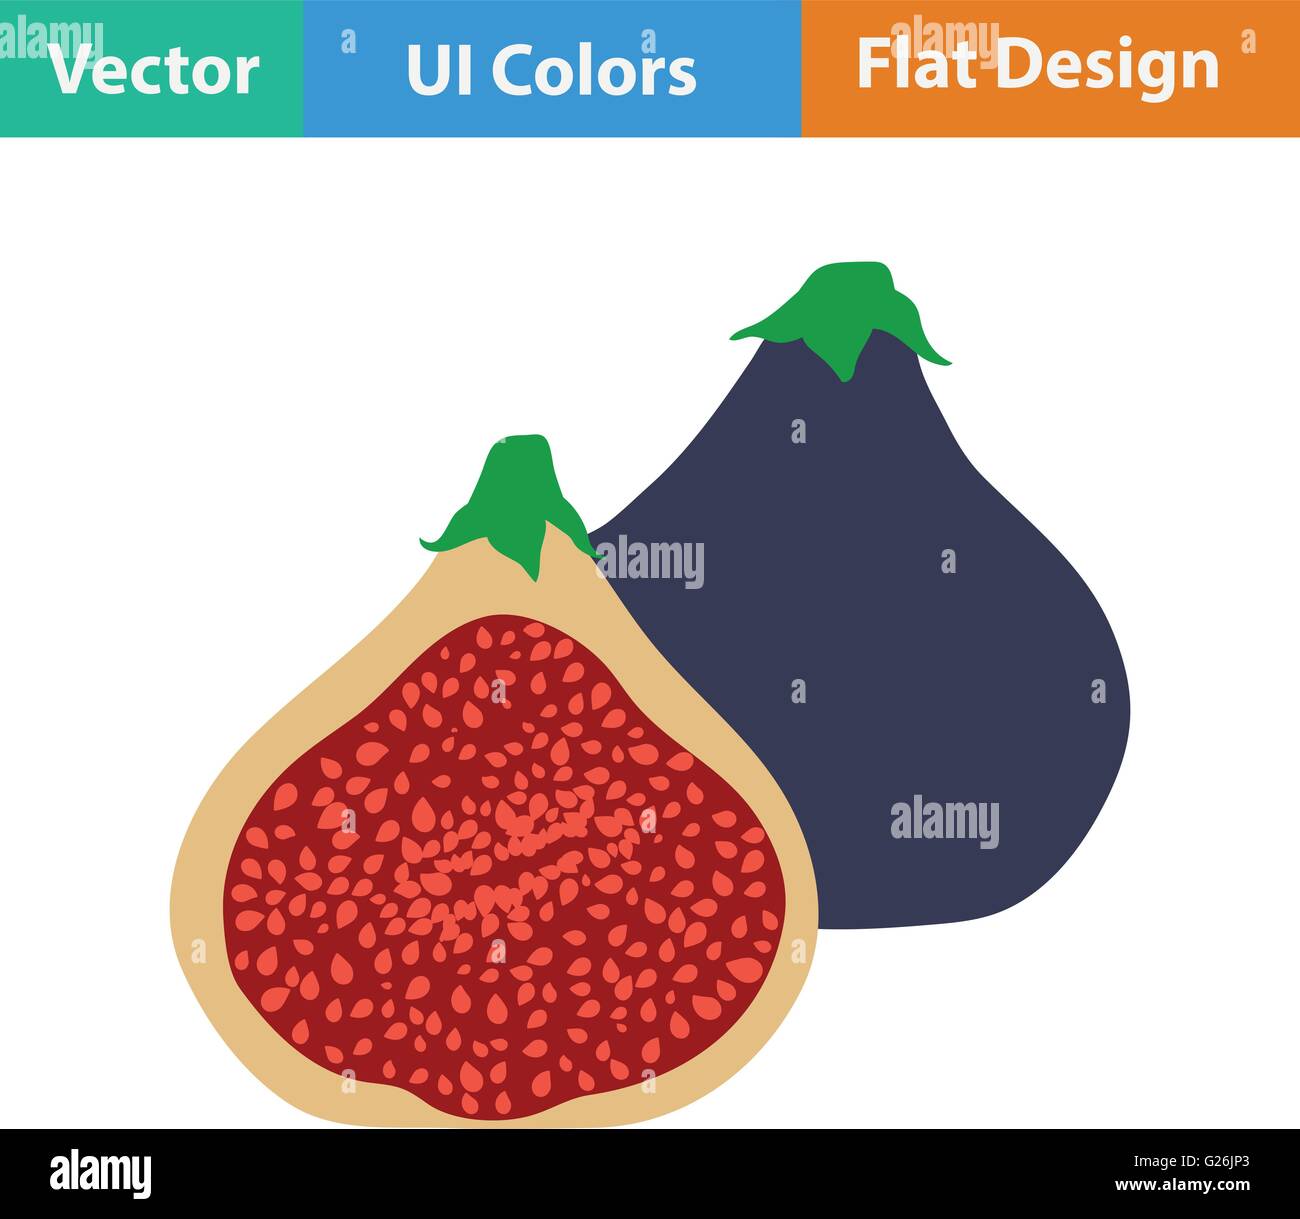 Flat design icon of Fig fruit in ui colors. Vector illustration. Stock Vector